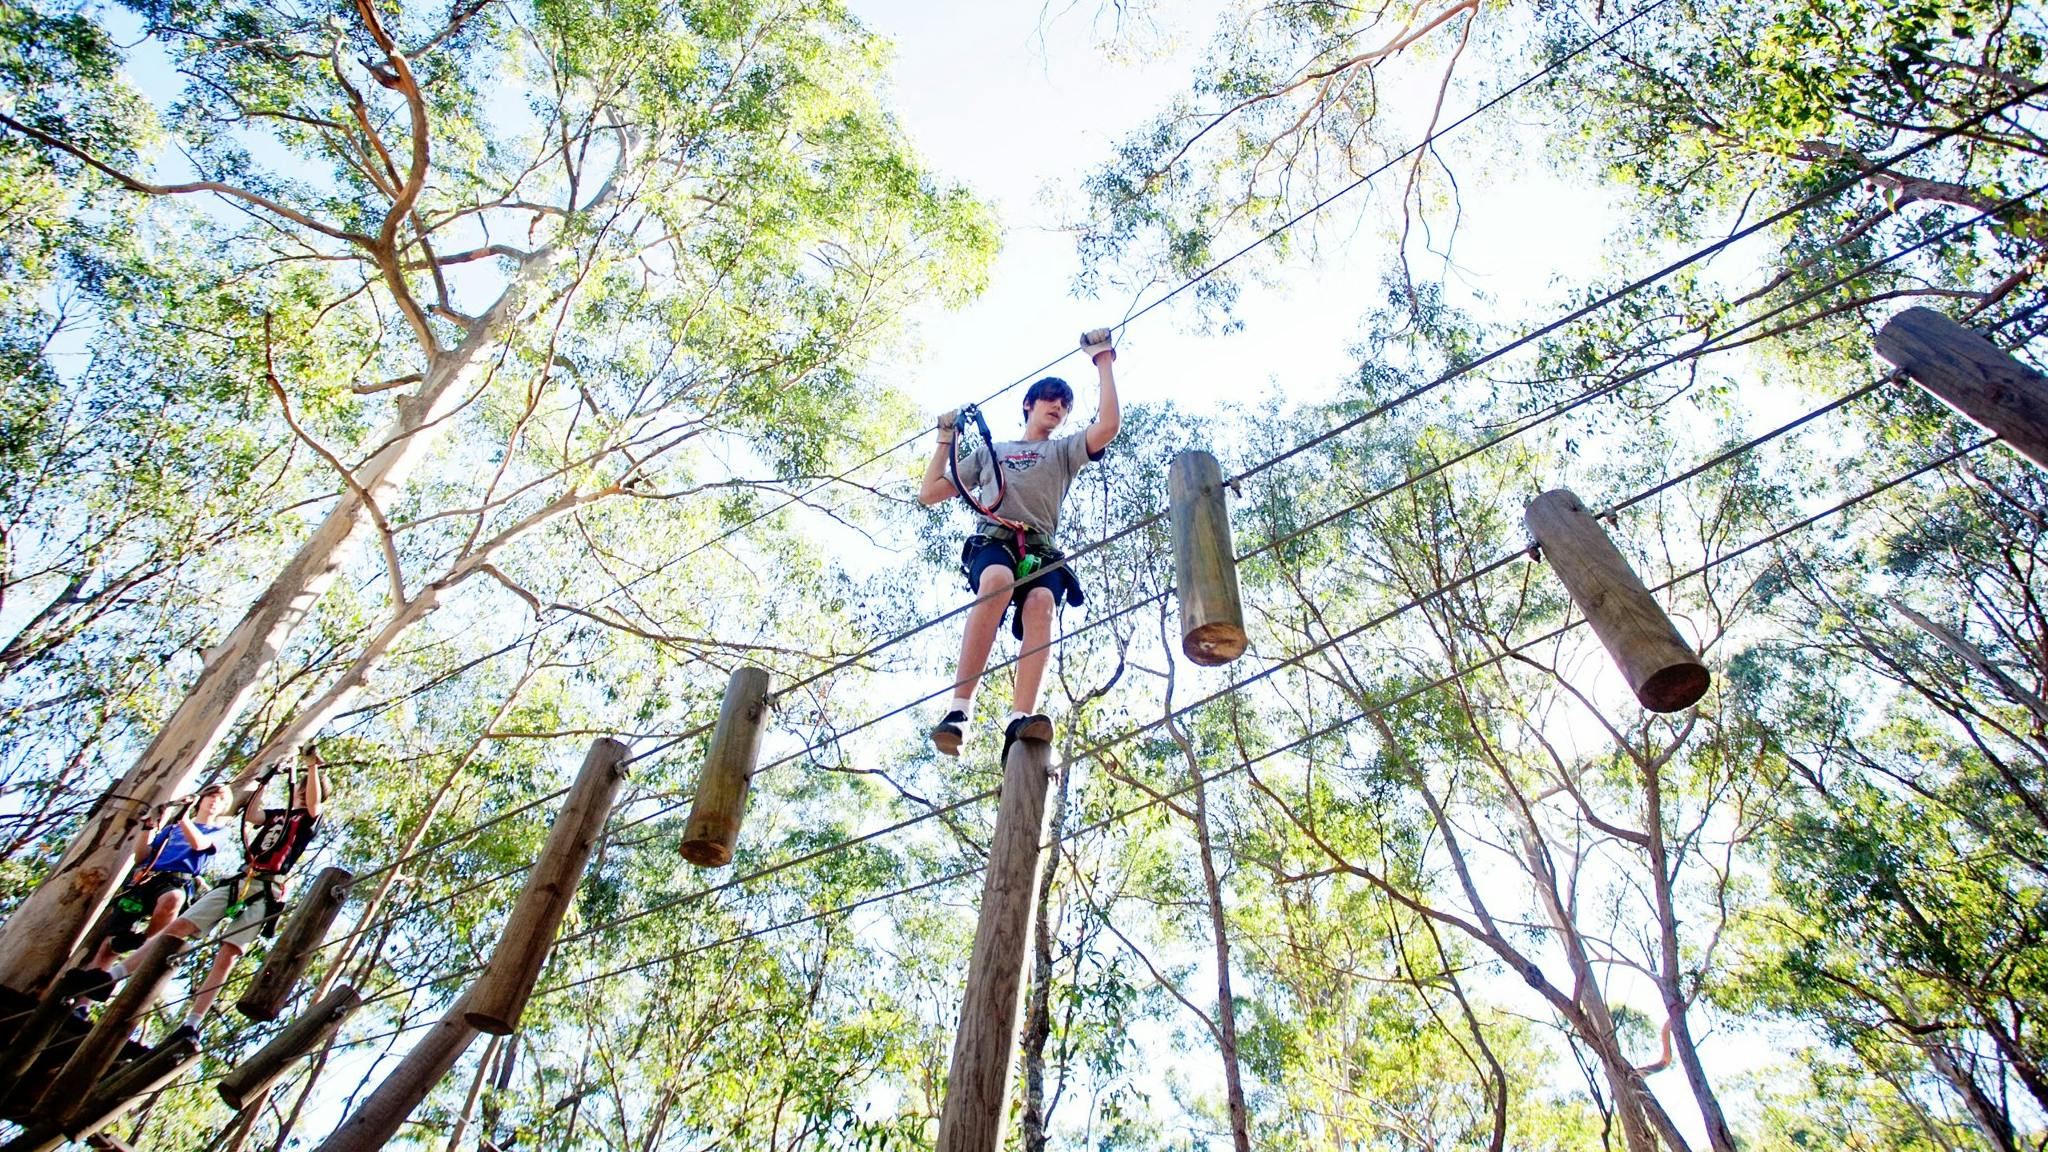 Suspended Logs will test your nerves!